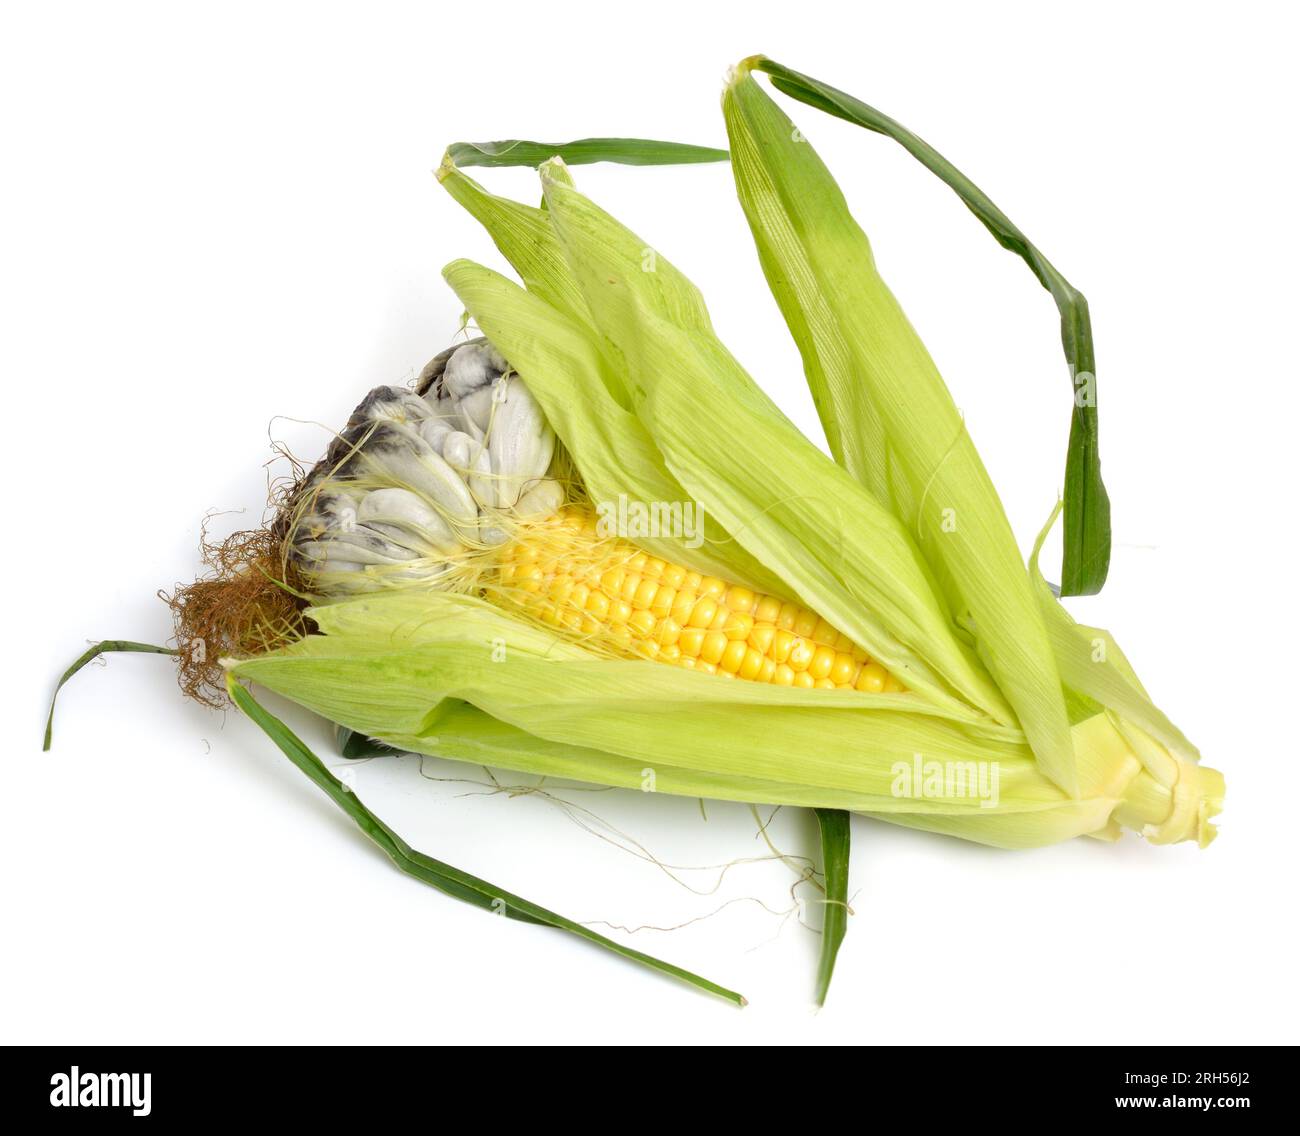 Corn smut is a plant disease caused by the pathogenic fungus Ustilago maydis. On white background. Stock Photo